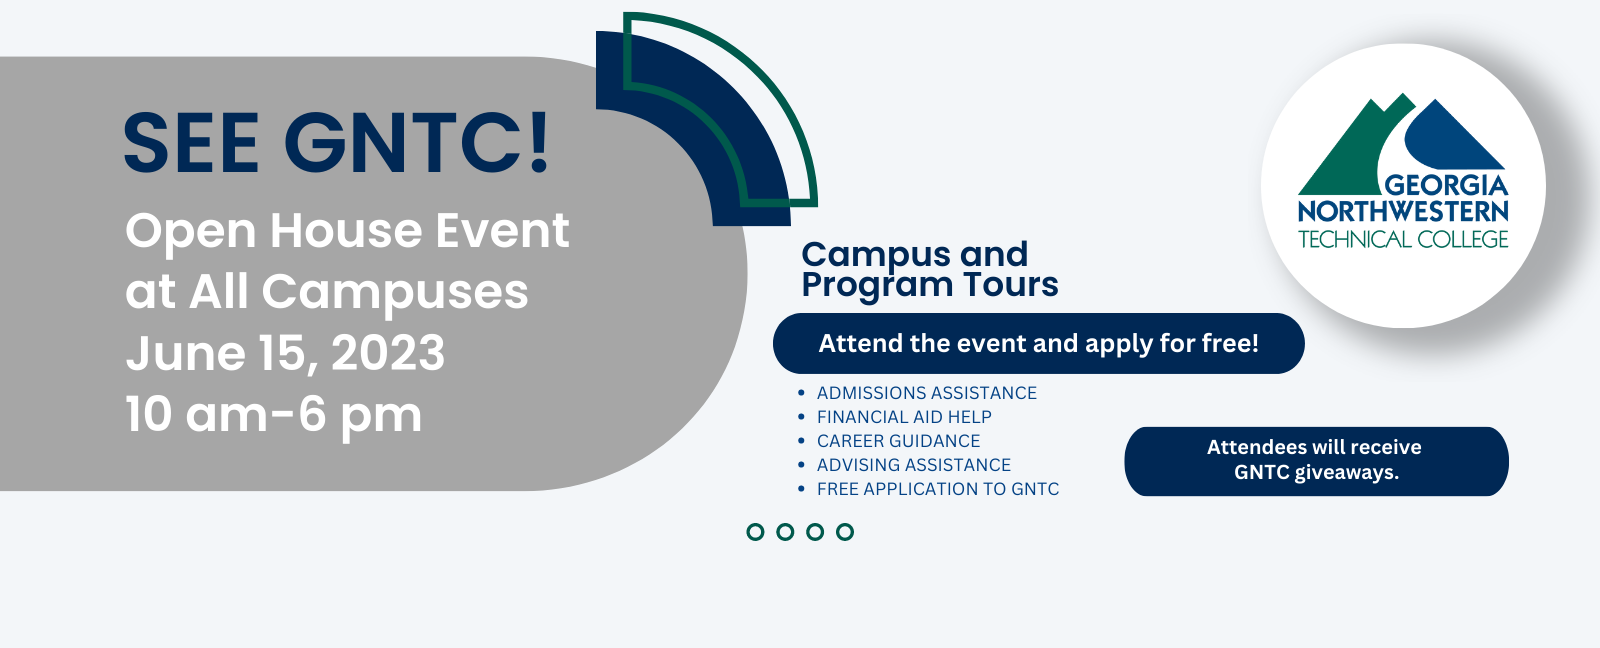 See GNTC! Open House Event at all campuses 
June 15, 2023
10 am-6 pm